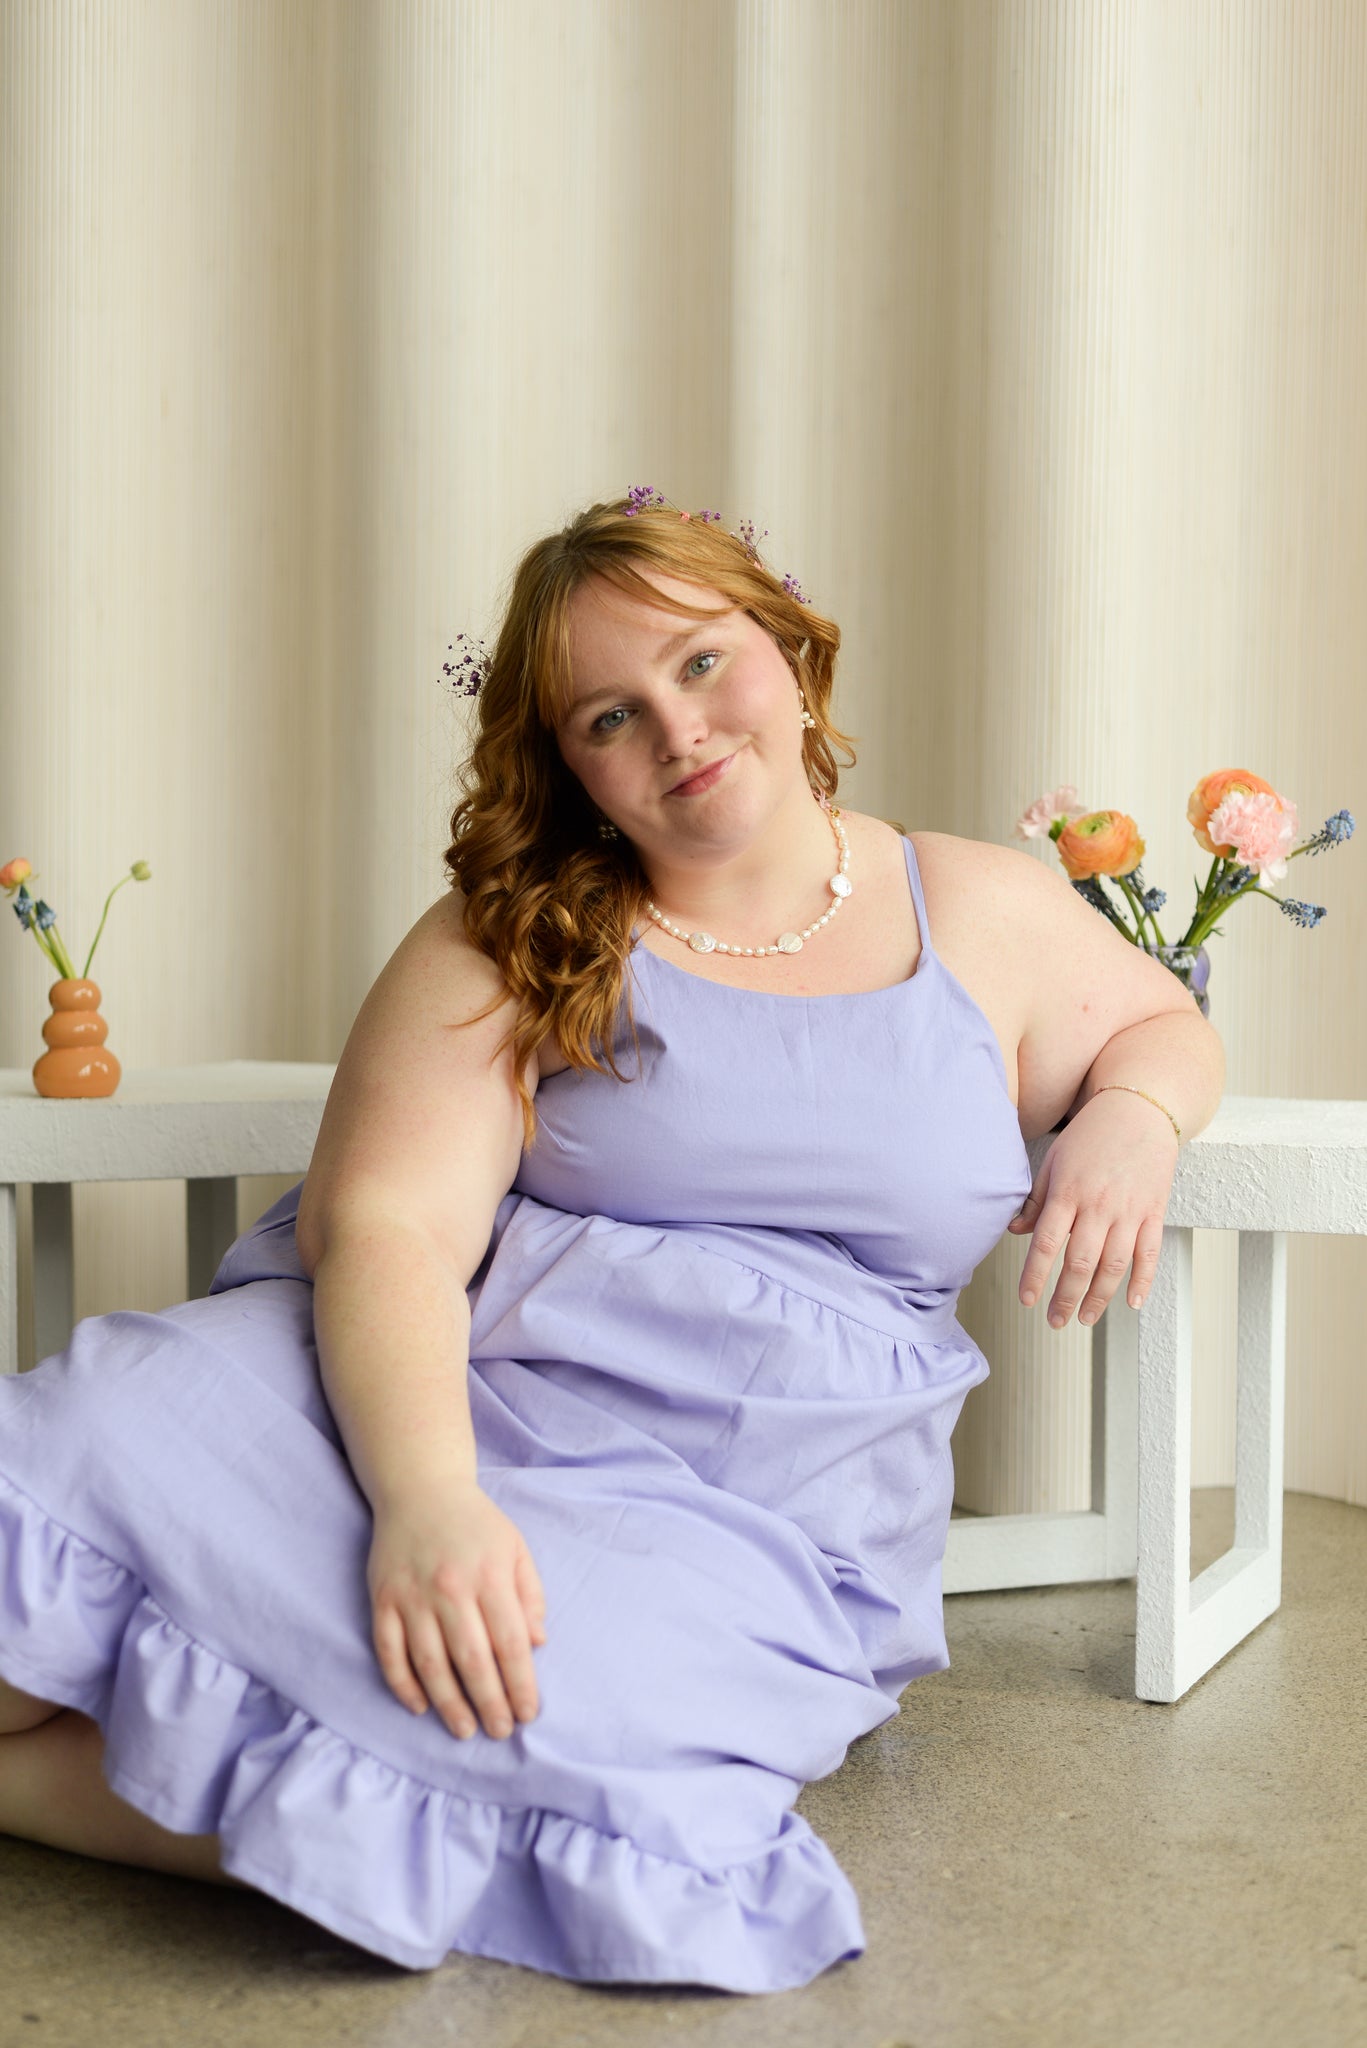 plus size model sitting on the floor while wearing a lavender organic cotton summer dress